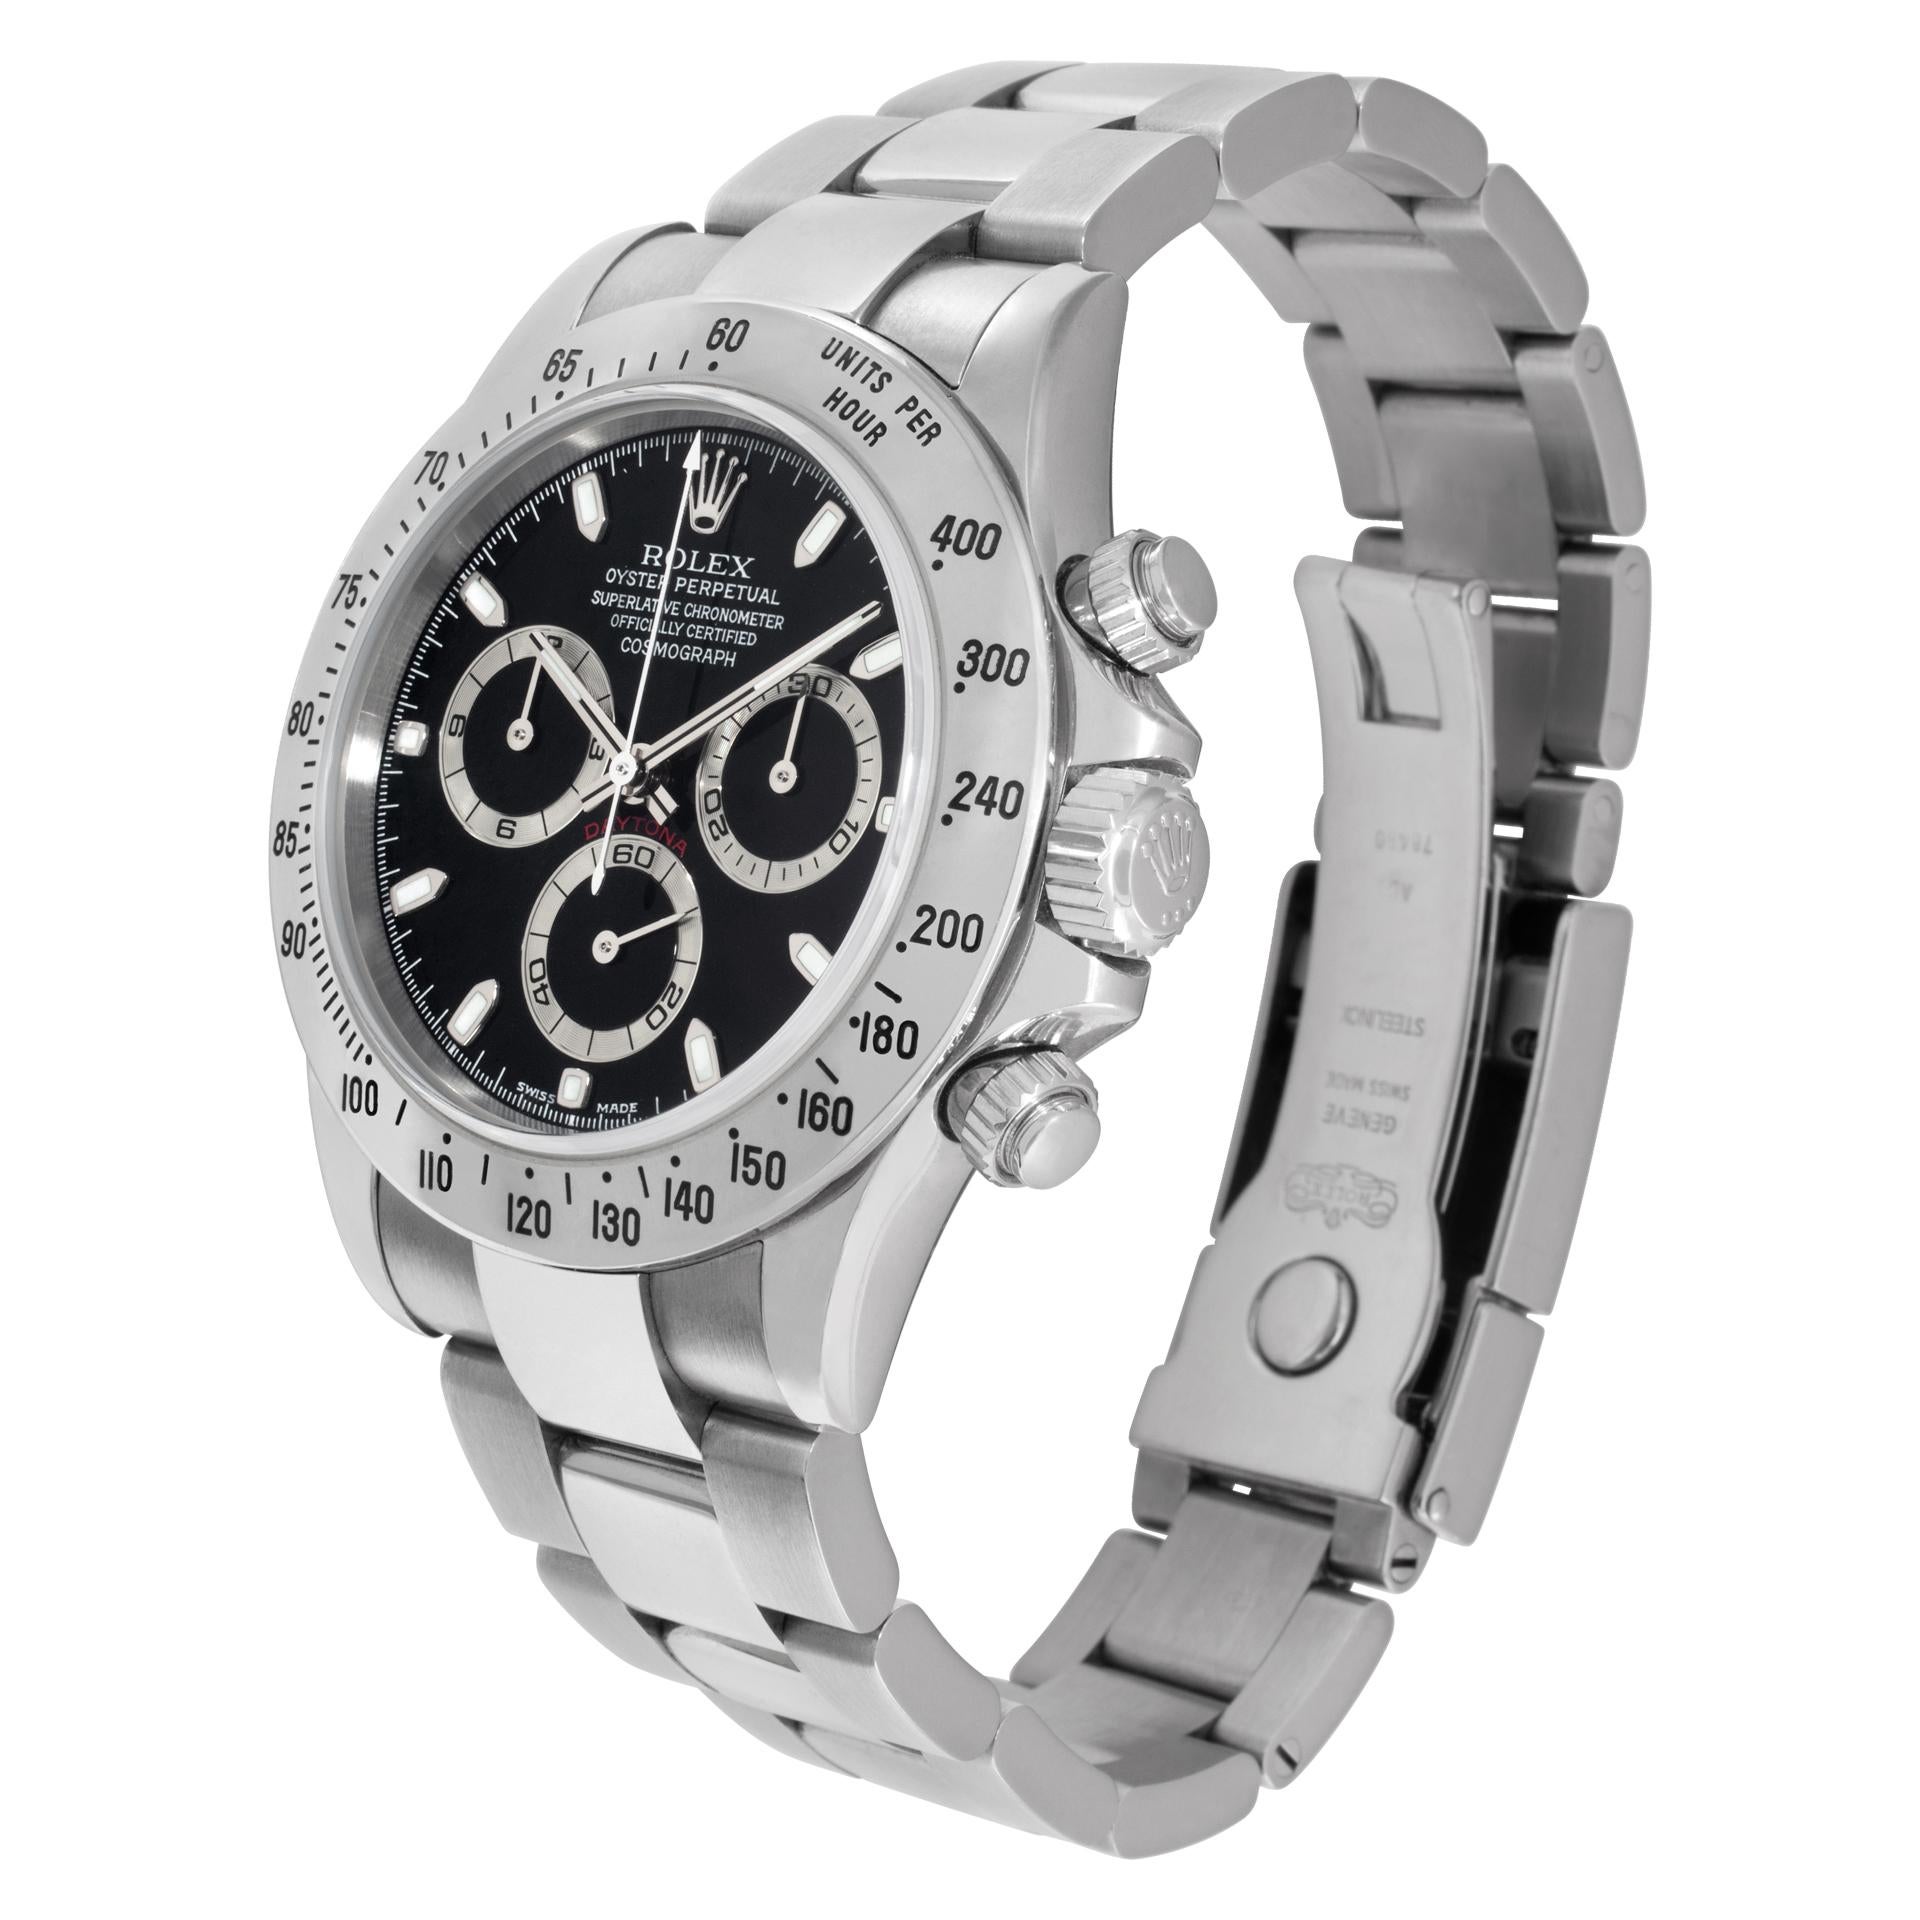 Rolex Daytona in stainless steel with black dial. Auto w/ subseconds and chronograph. 40 mm case size. CIrca 2002. Ref 116520. **Bank Wire only at this price** Fine Pre-owned Rolex Watch. Certified preowned Sport Rolex Daytona 116520 watch is made